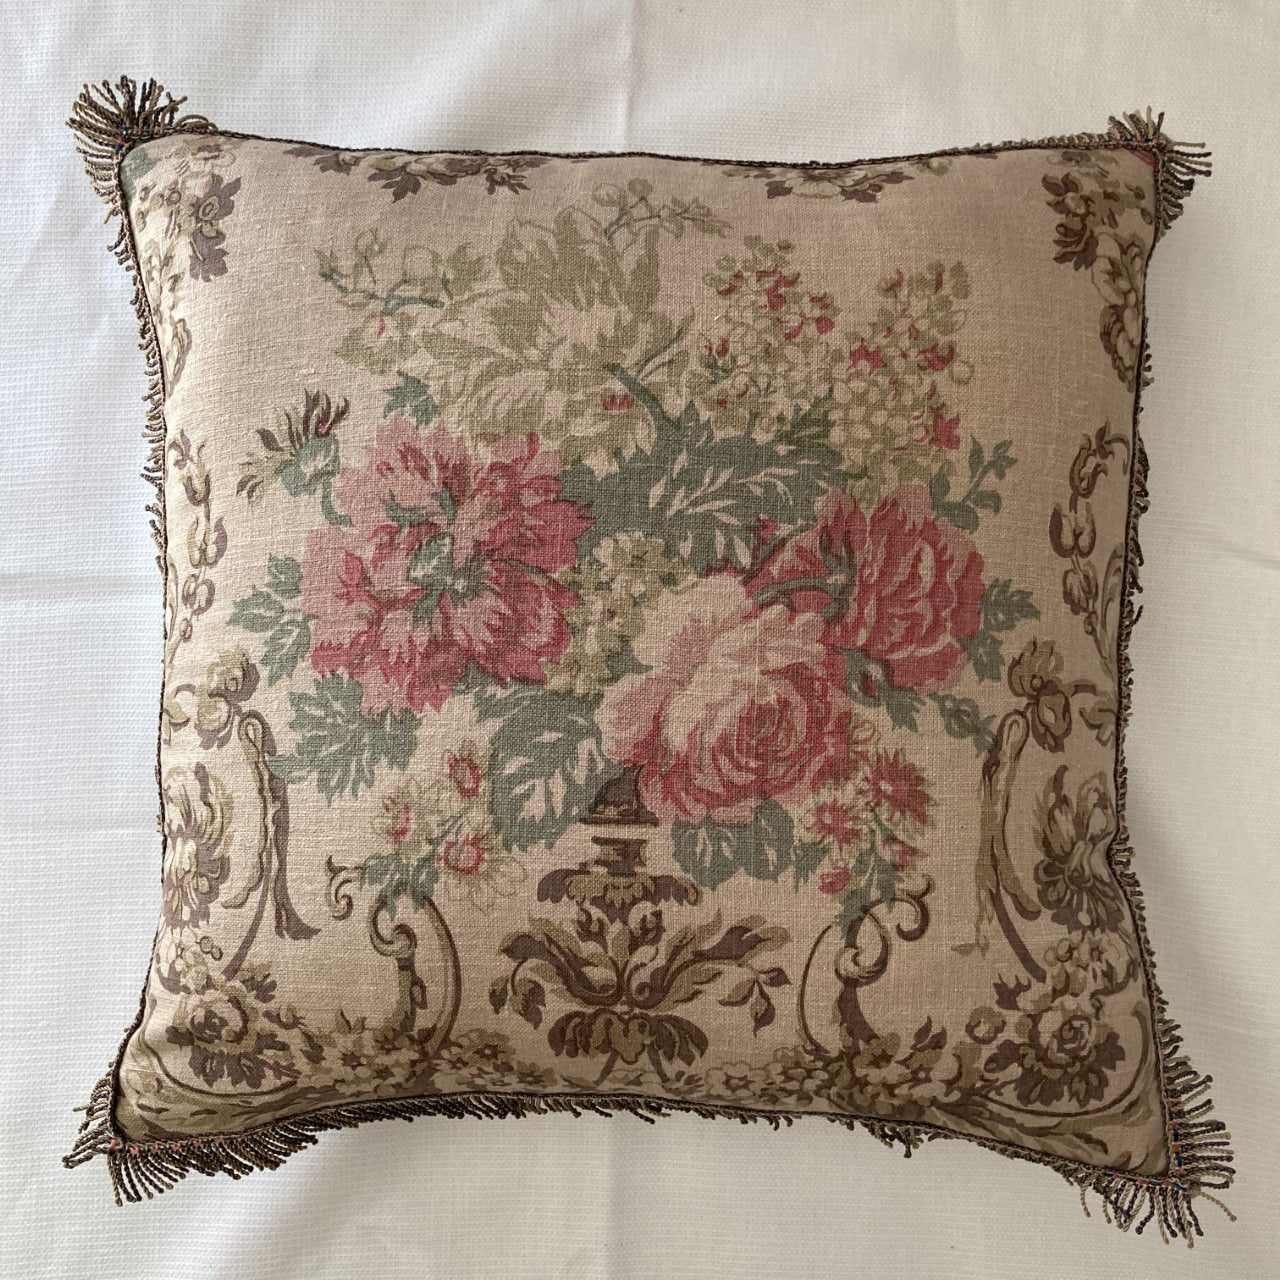 Roses in an Urn 20 x 20 Square Decorative Designer Pillow with Down Feather Insert